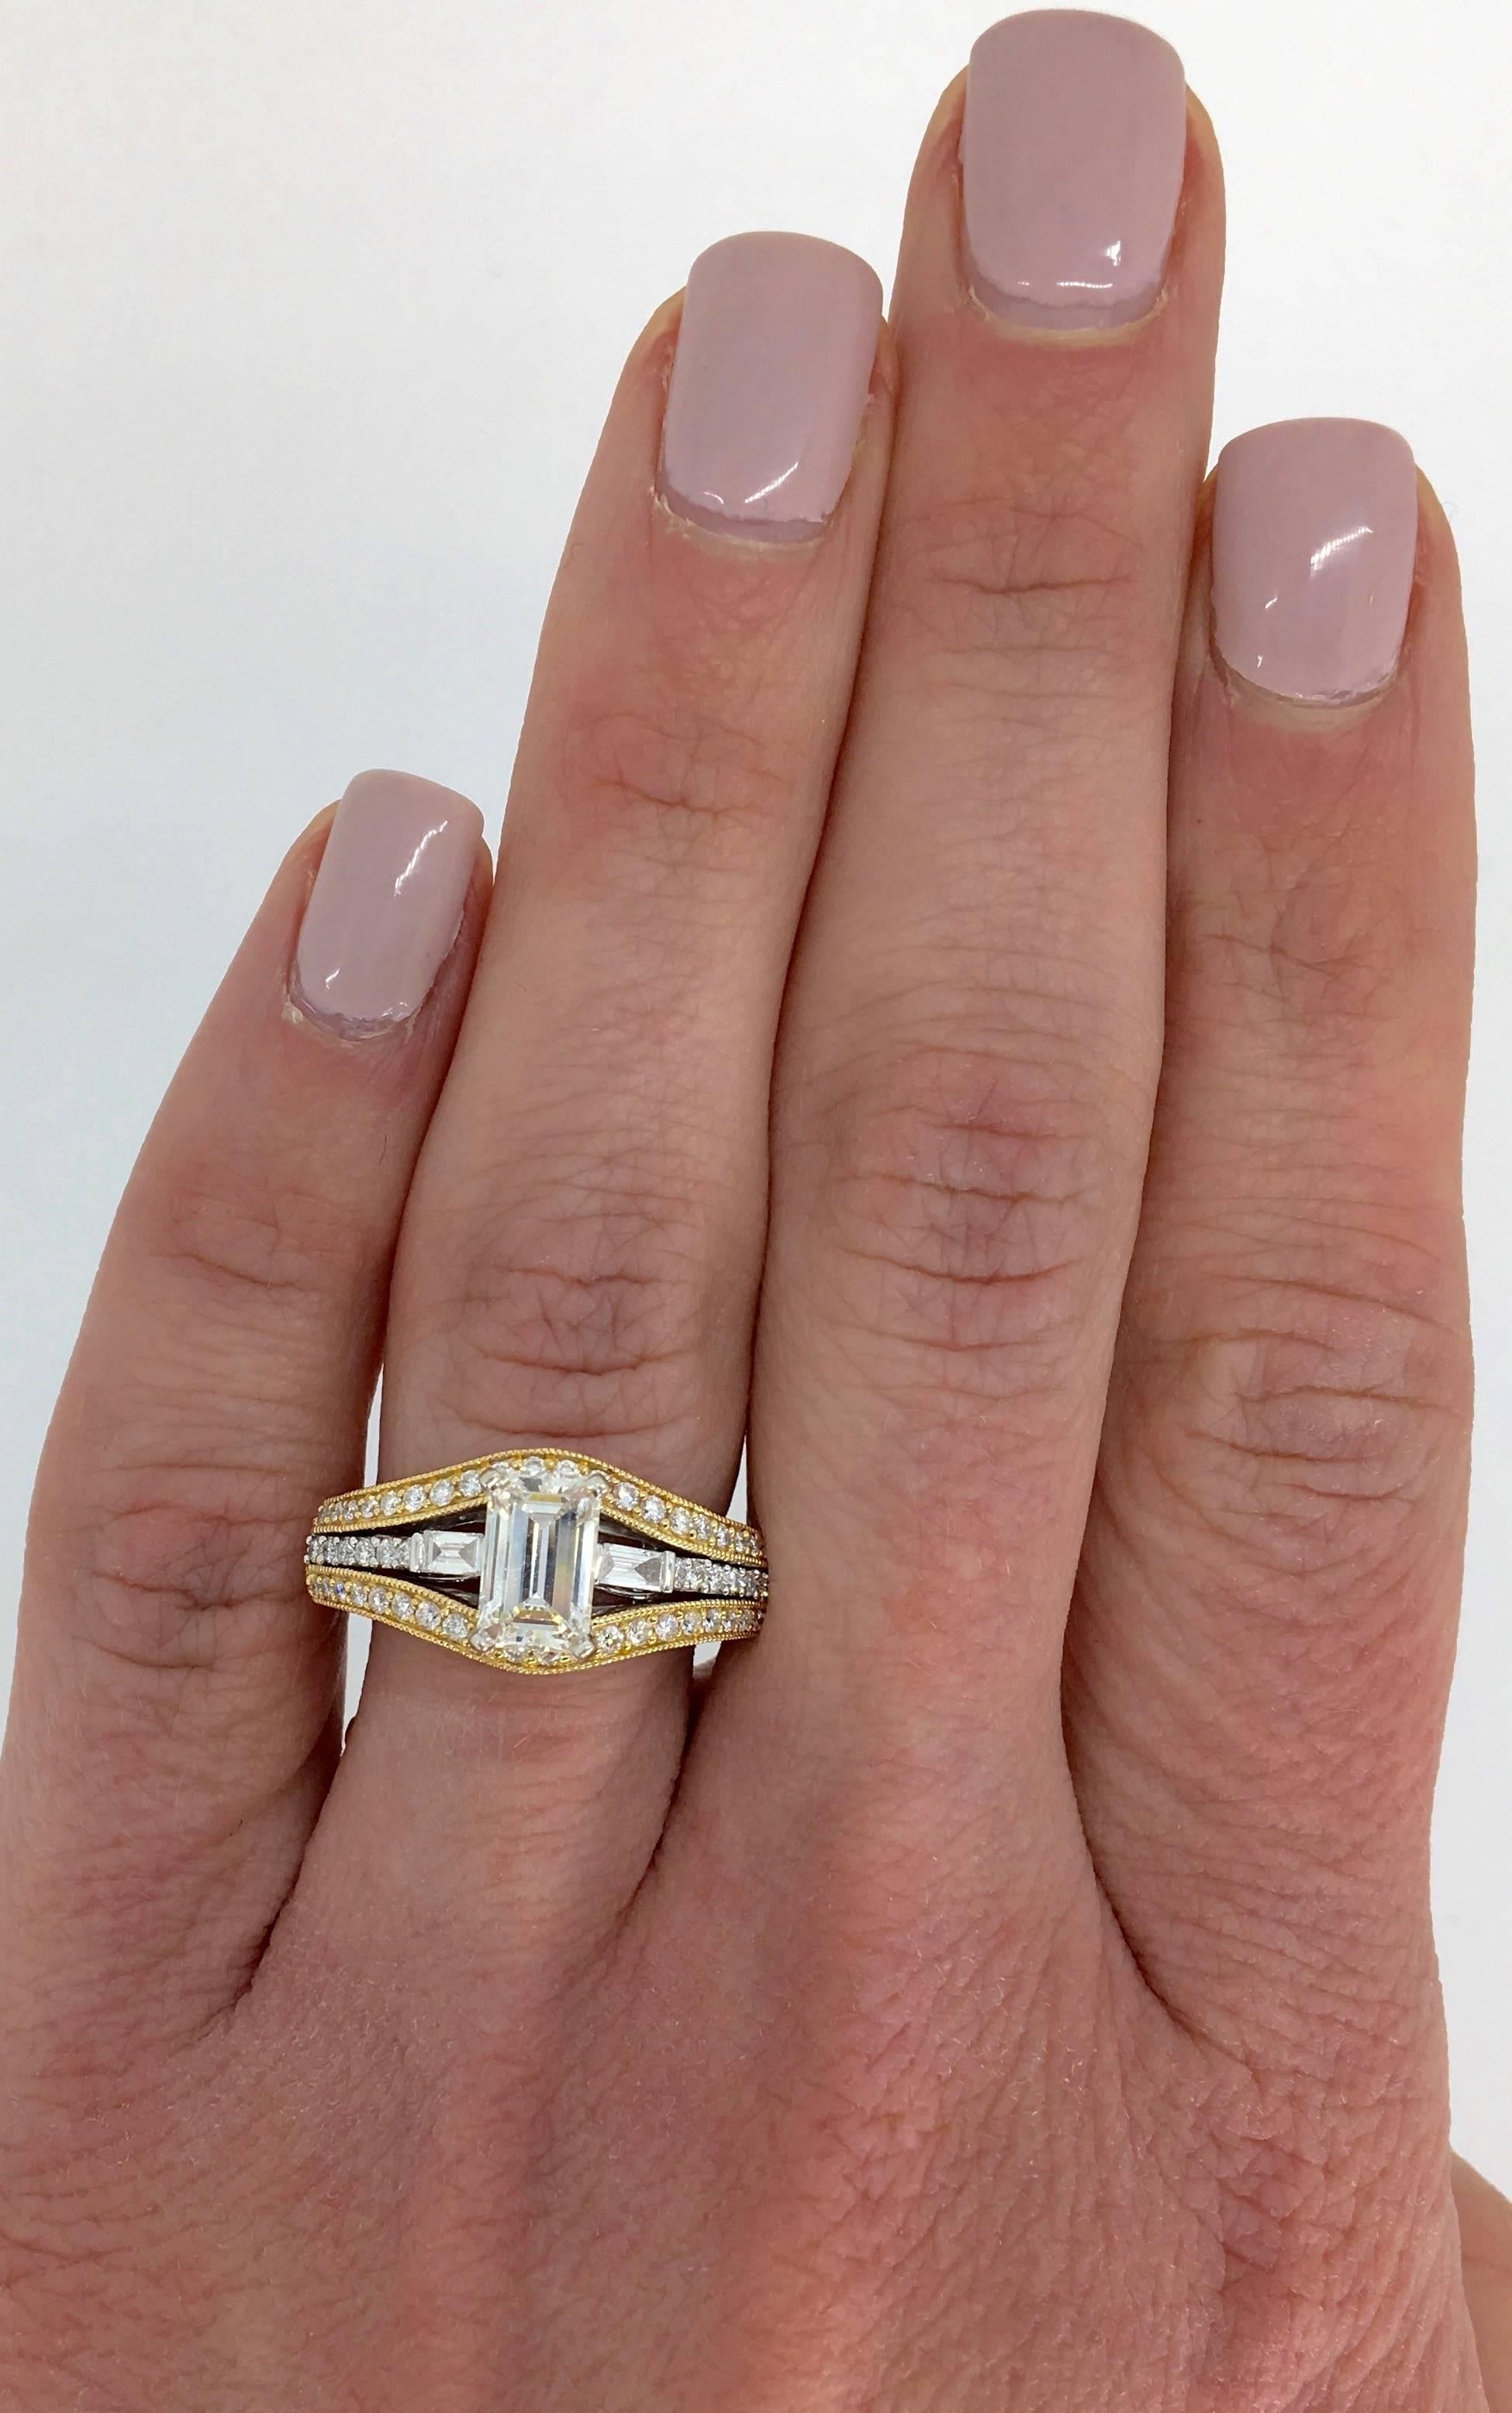 Unique two-tone diamond engagement ring with a 1.00ct Emerald cut diamond in the center, and 0.50ctw of Baguette and Round Brilliant cut diamonds surrounding it. 

Center Diamond Carat Weight: 1.00CT
Center Diamond Cut: Emerald Cut 
Center Diamond